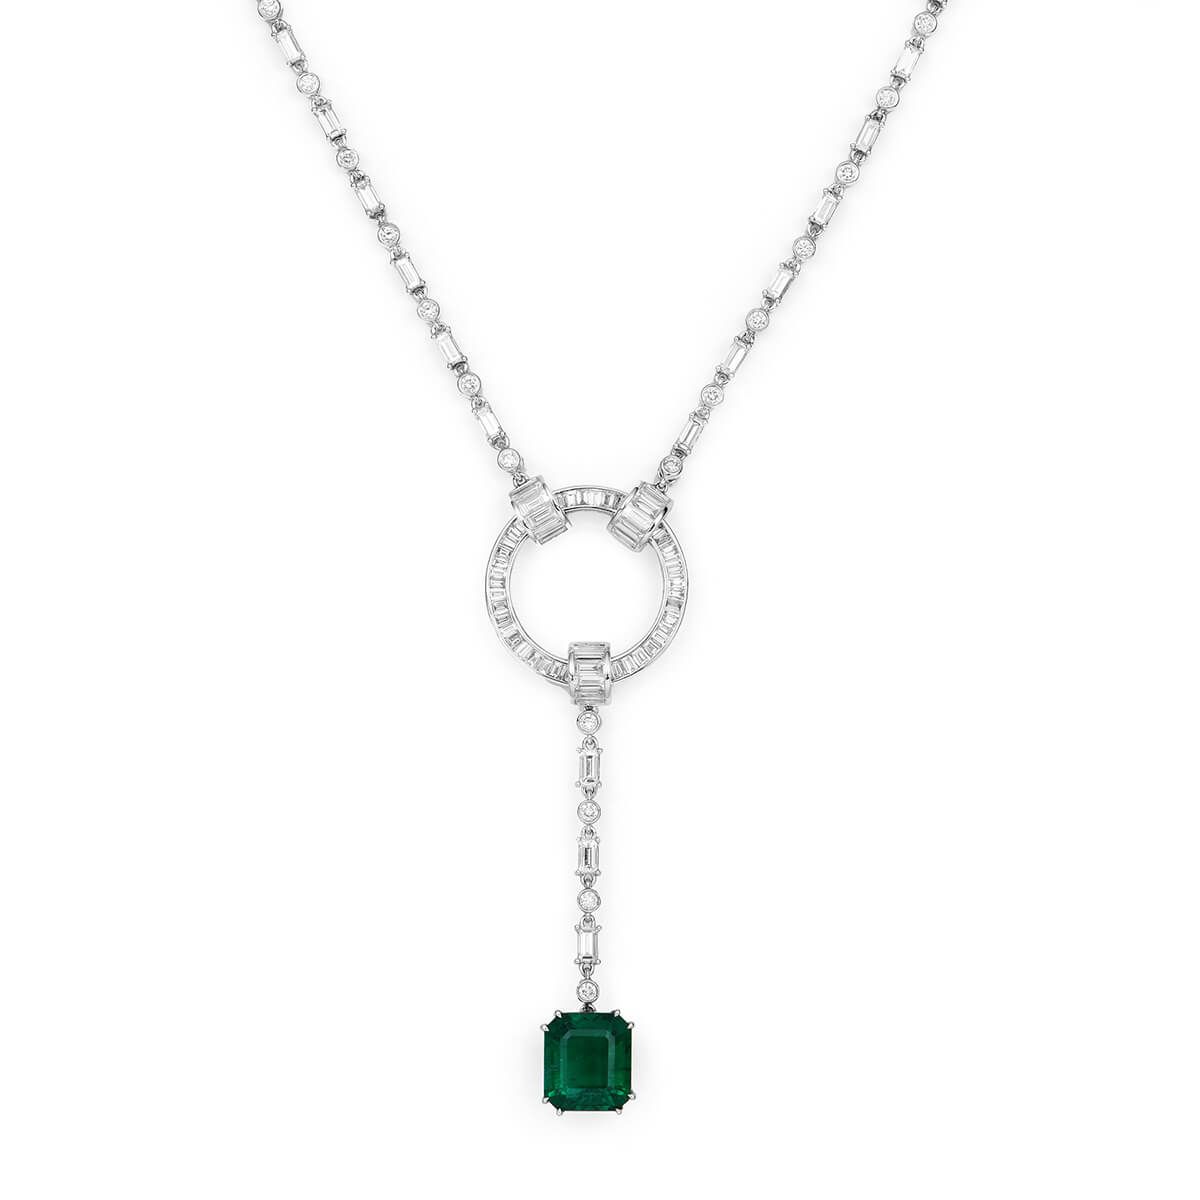 Natural Vivid Green Emerald Necklace, 8.52 Ct. TW, GRS Certified, GRS2018-078134, Unheated